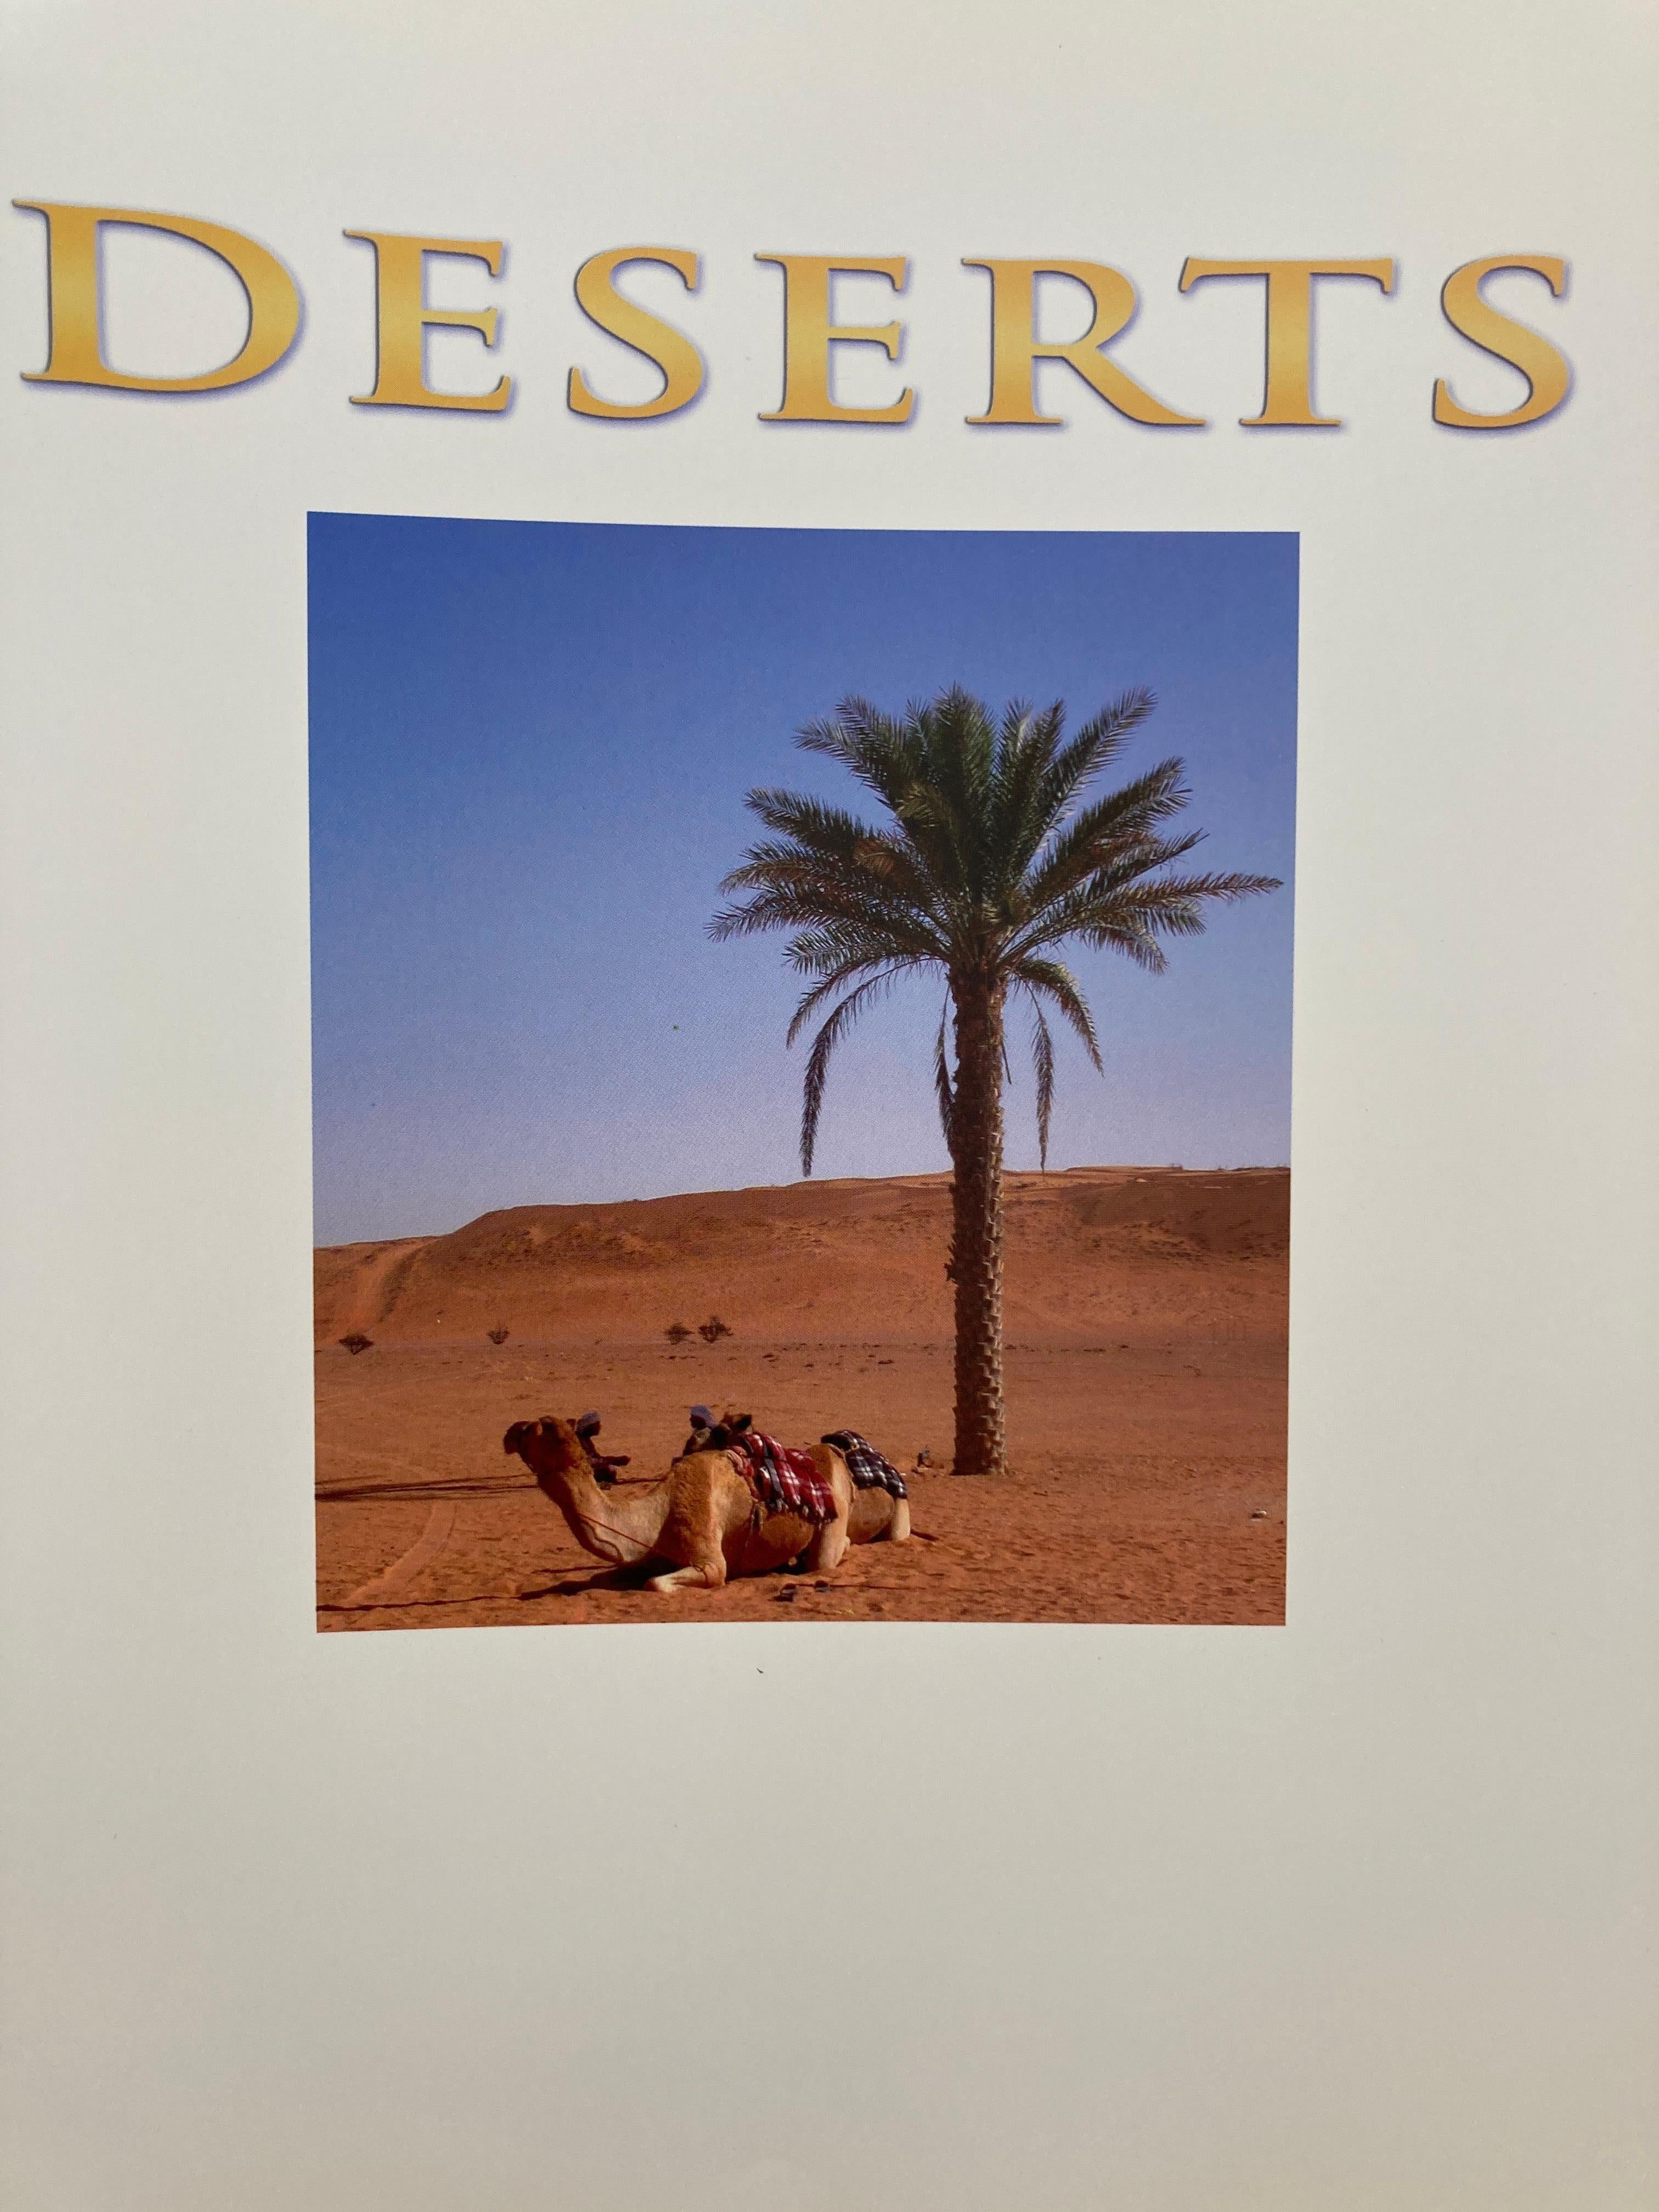 British Deserts A Panoramic Vision by David Miller Large Hardcover Book For Sale